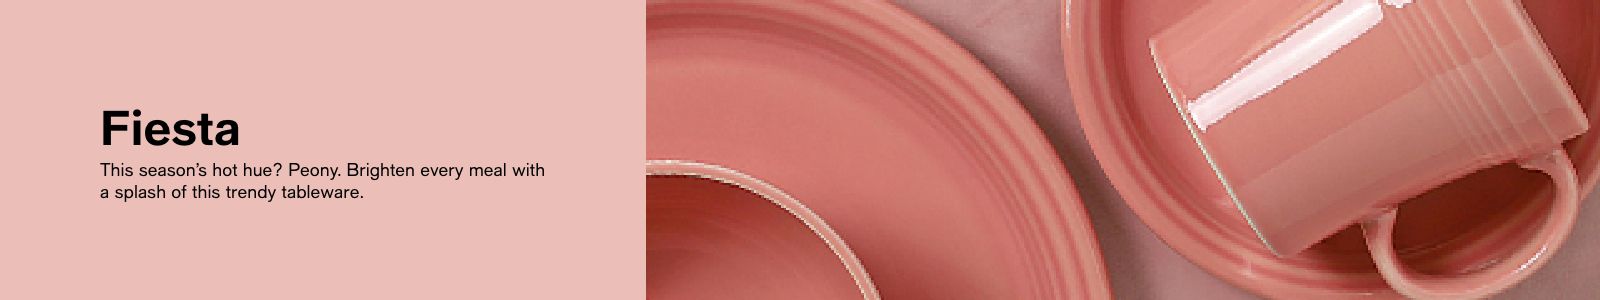 Fiesta, This season's hot hue? Peony, Brighten every meal with a splash of this trendy tableware